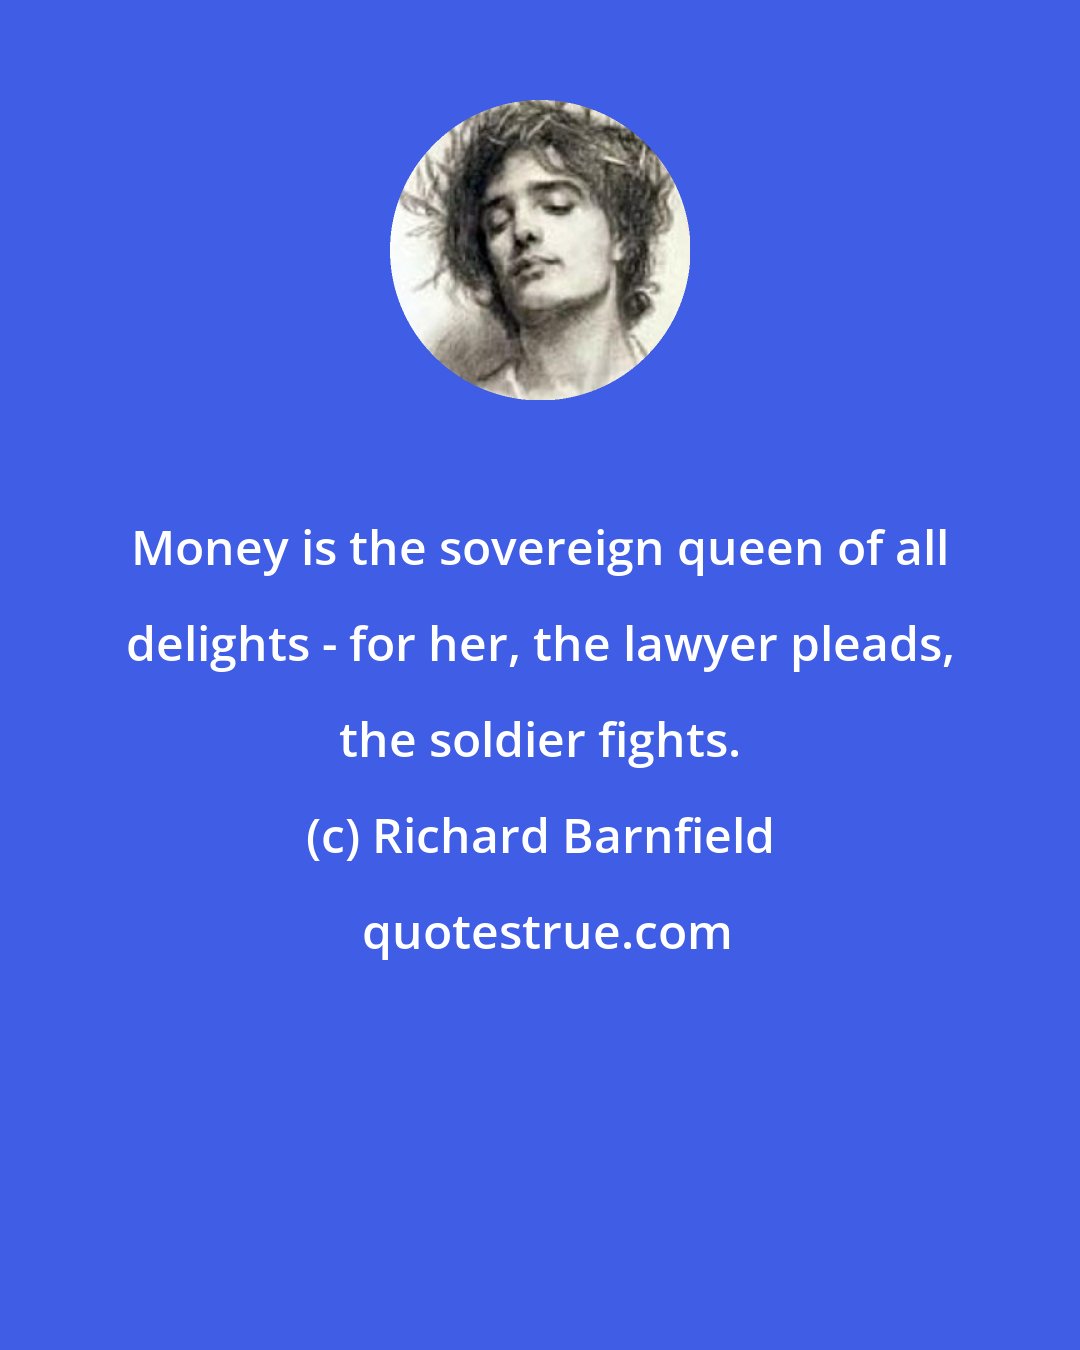 Richard Barnfield: Money is the sovereign queen of all delights - for her, the lawyer pleads, the soldier fights.